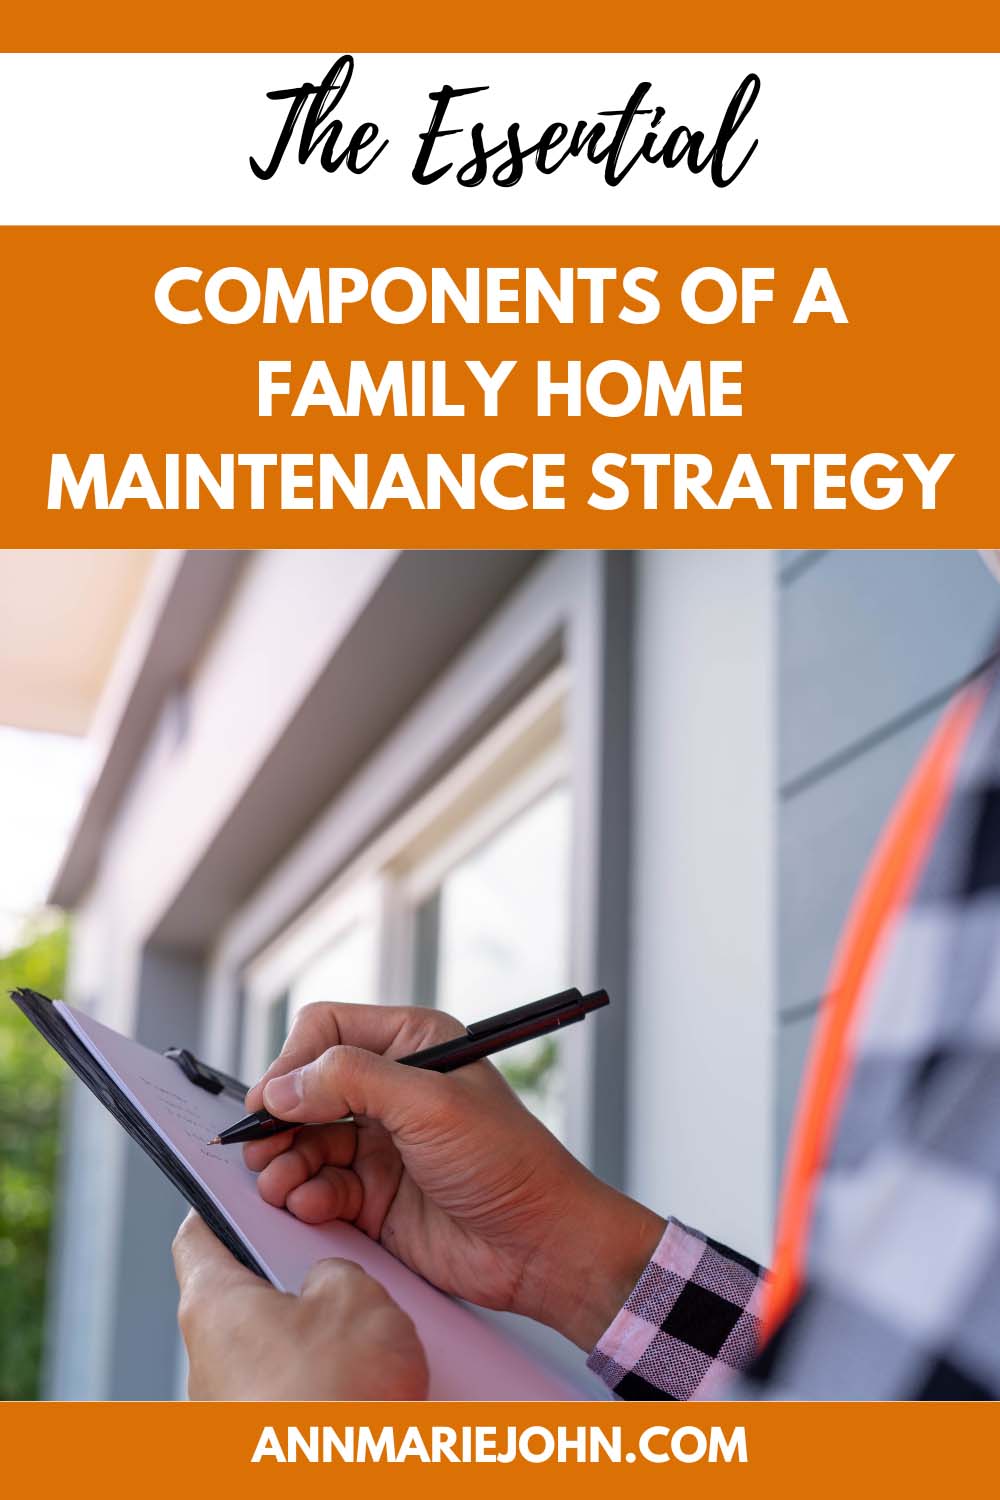 The Essential Components of a Family Home Maintenance Strategy